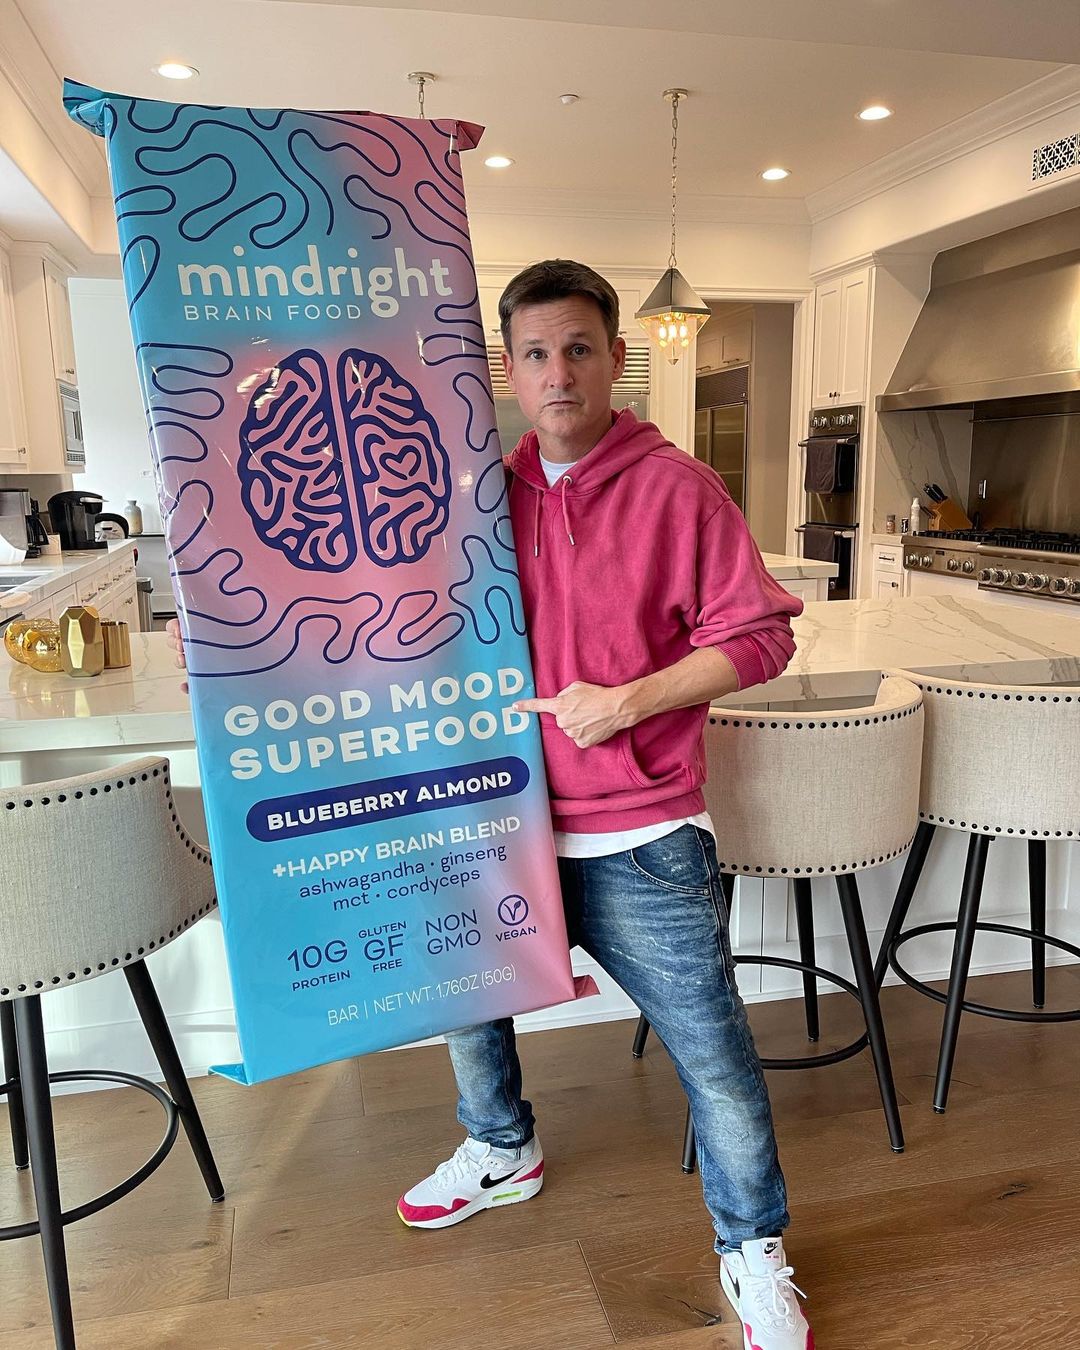 Rob Dyrdek promoting his client’s products